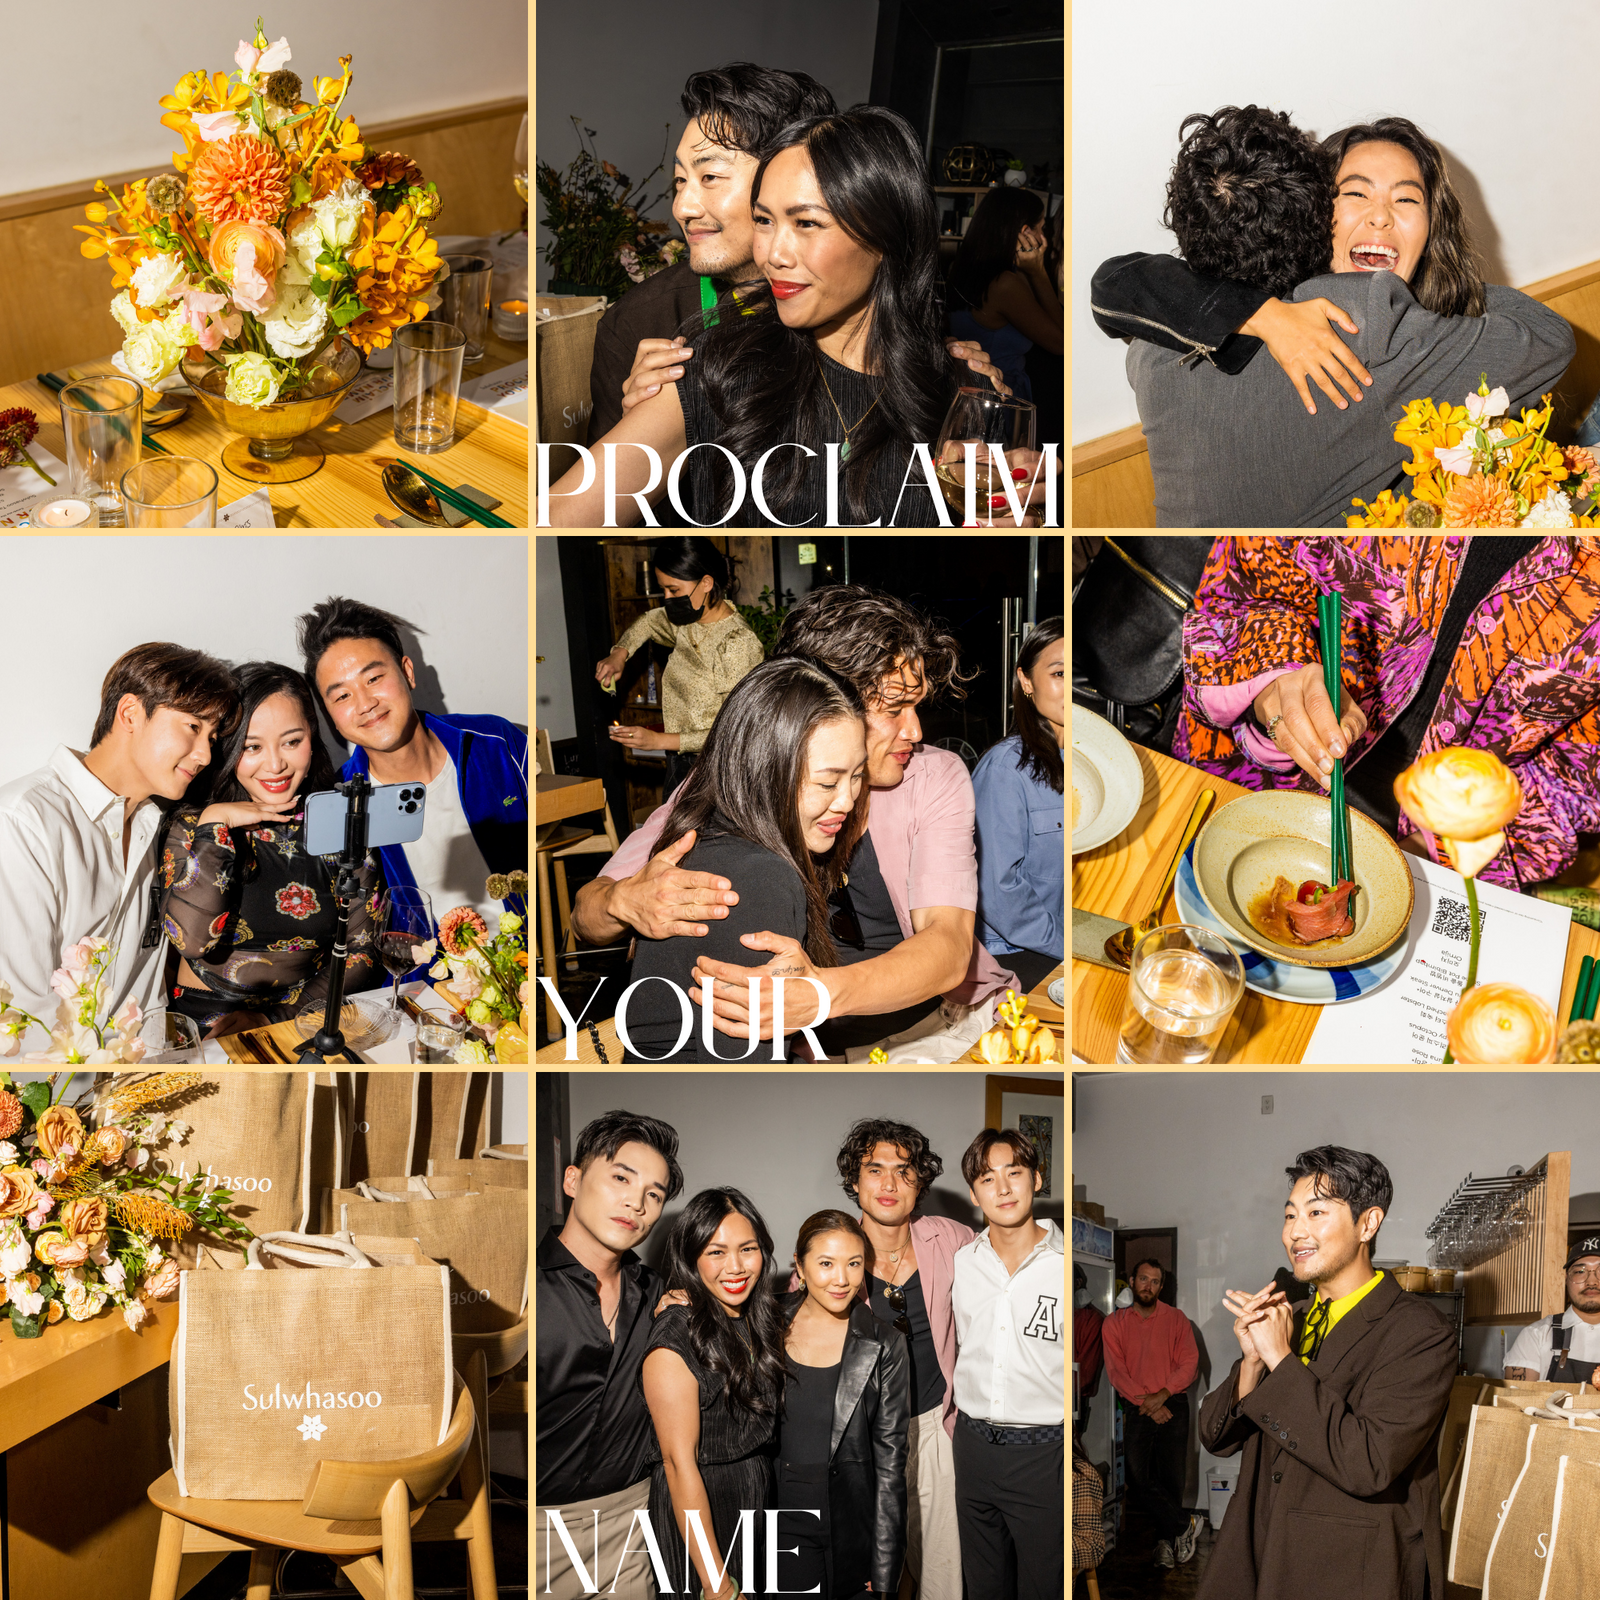 Charles Melton, Michelle Phan, Kevin Woo and others at the Sulwhasoo dinner in Los Angeles